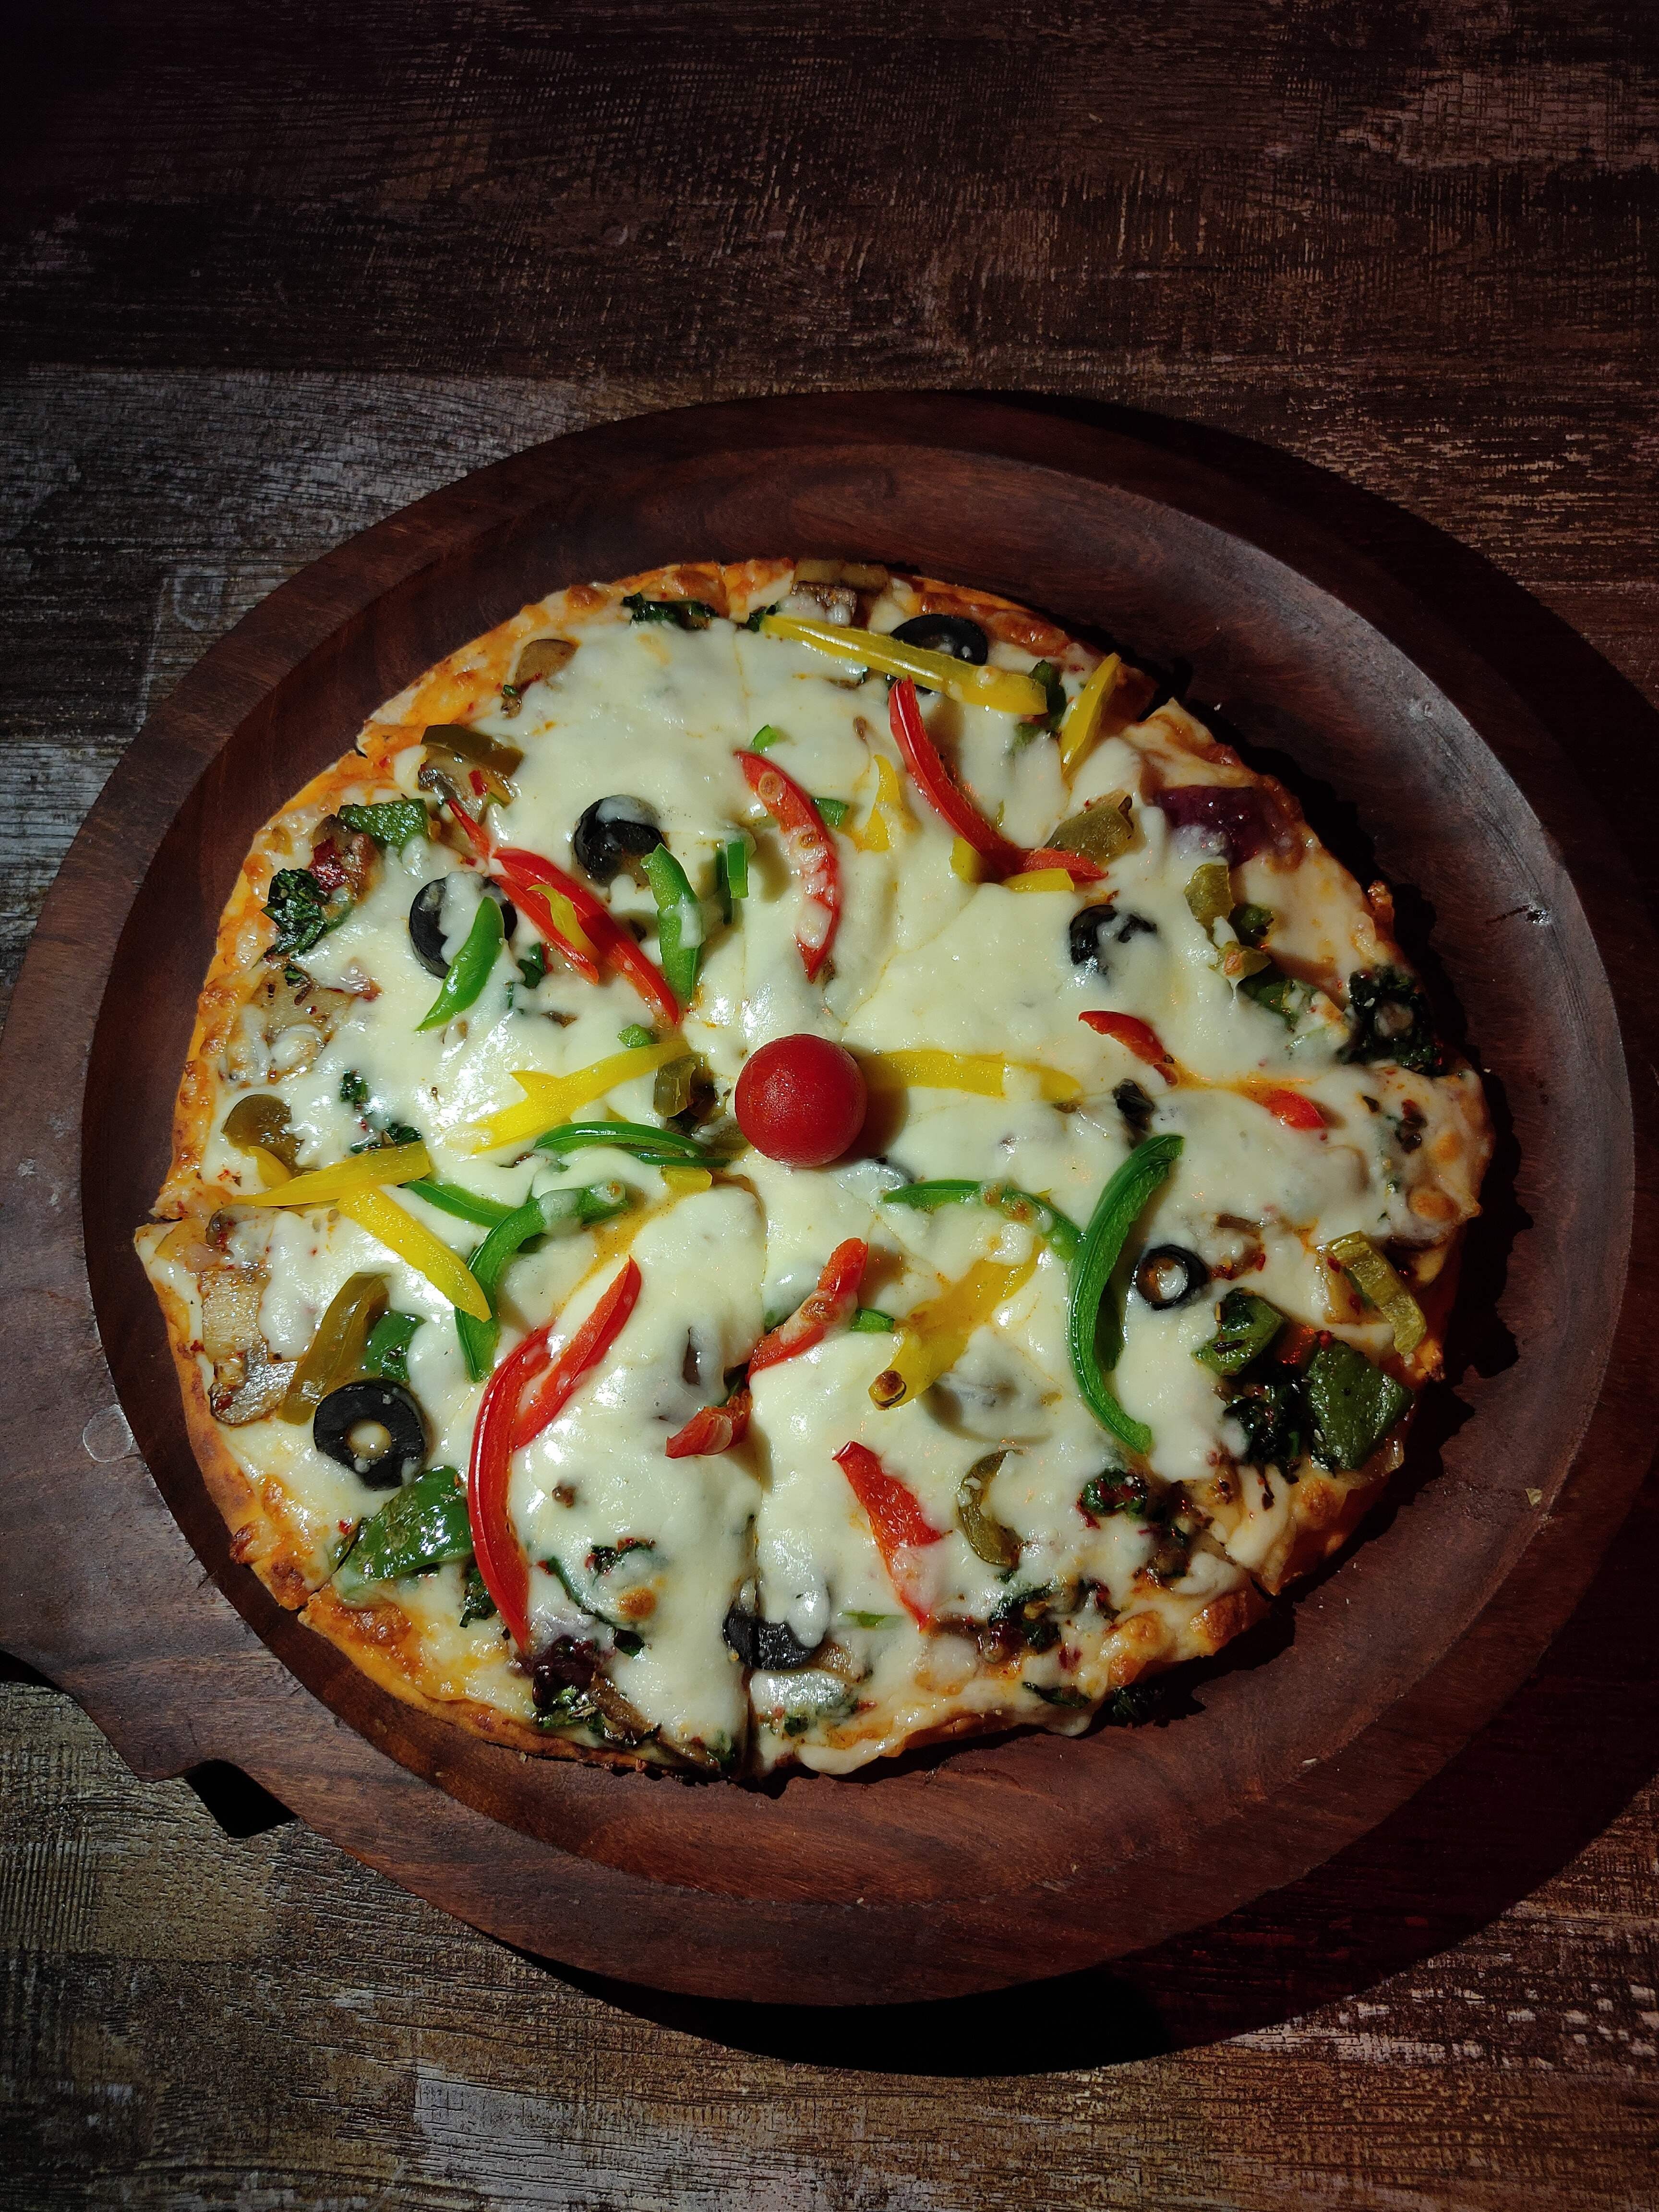 Dish,Food,Cuisine,Pizza cheese,Pizza,Ingredient,Flatbread,California-style pizza,Comfort food,Quiche